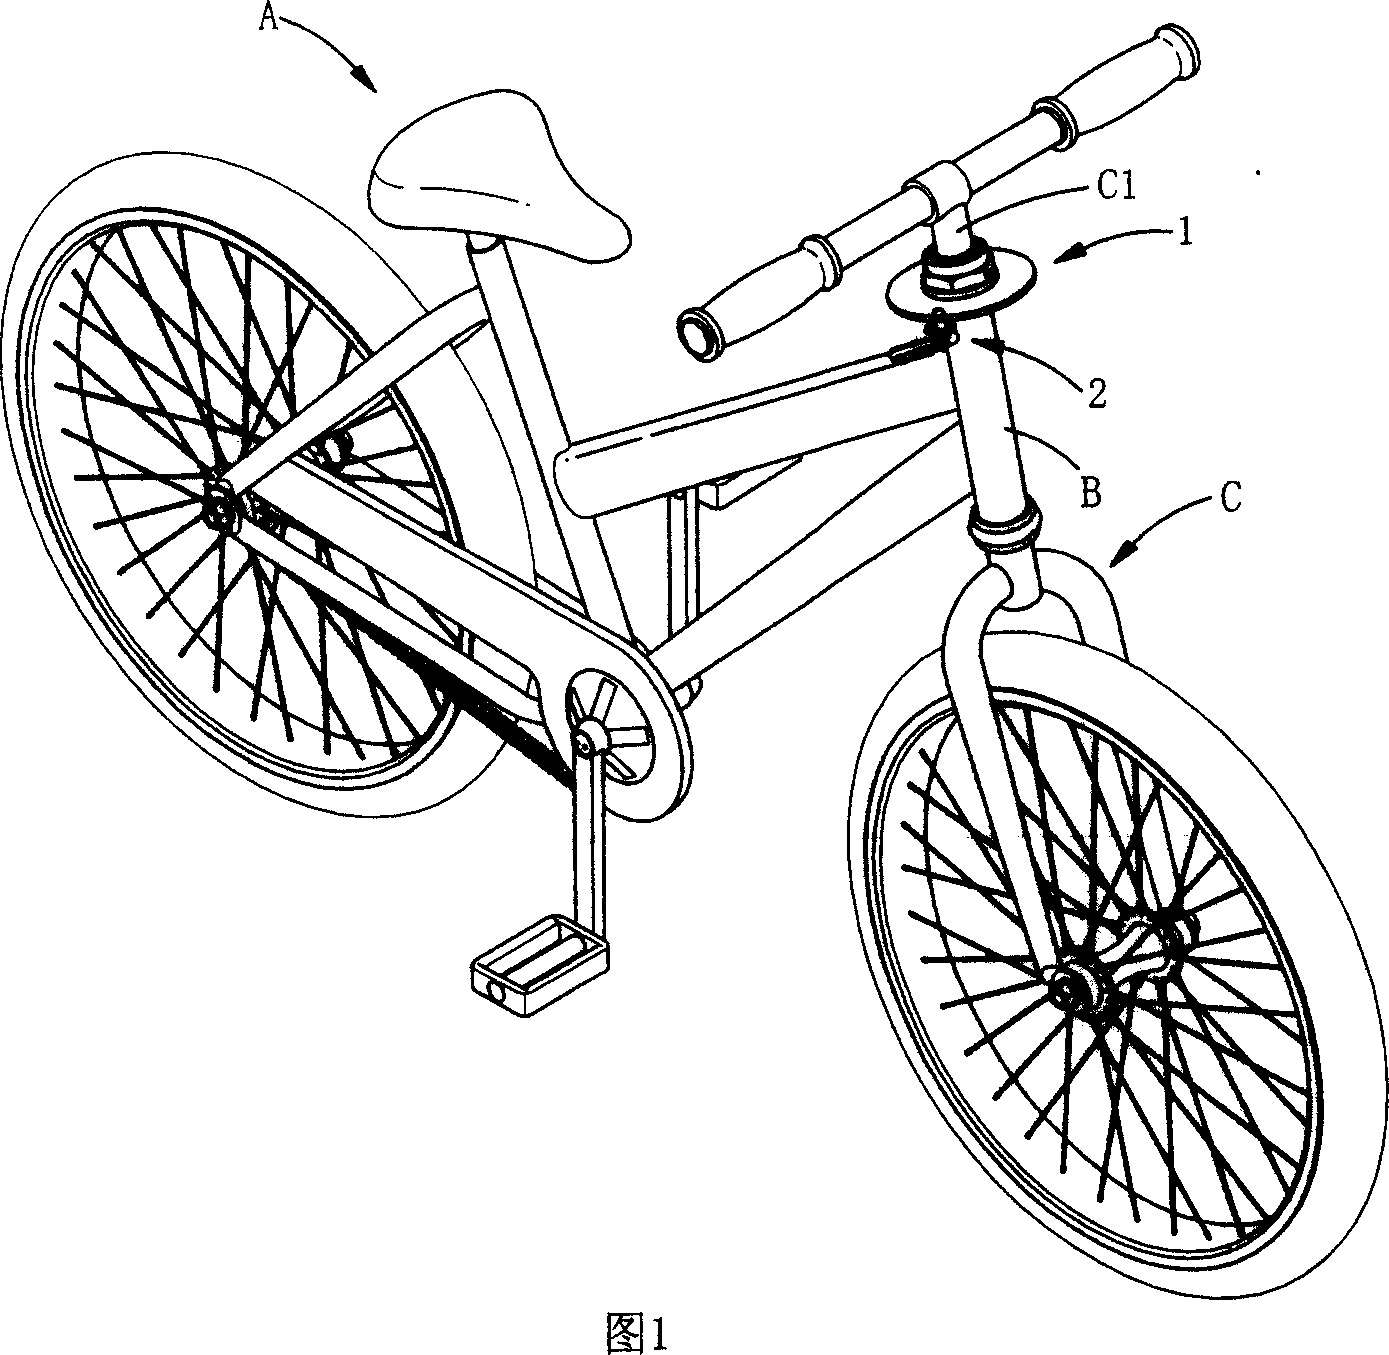 Positioning device for bicycle bibcock